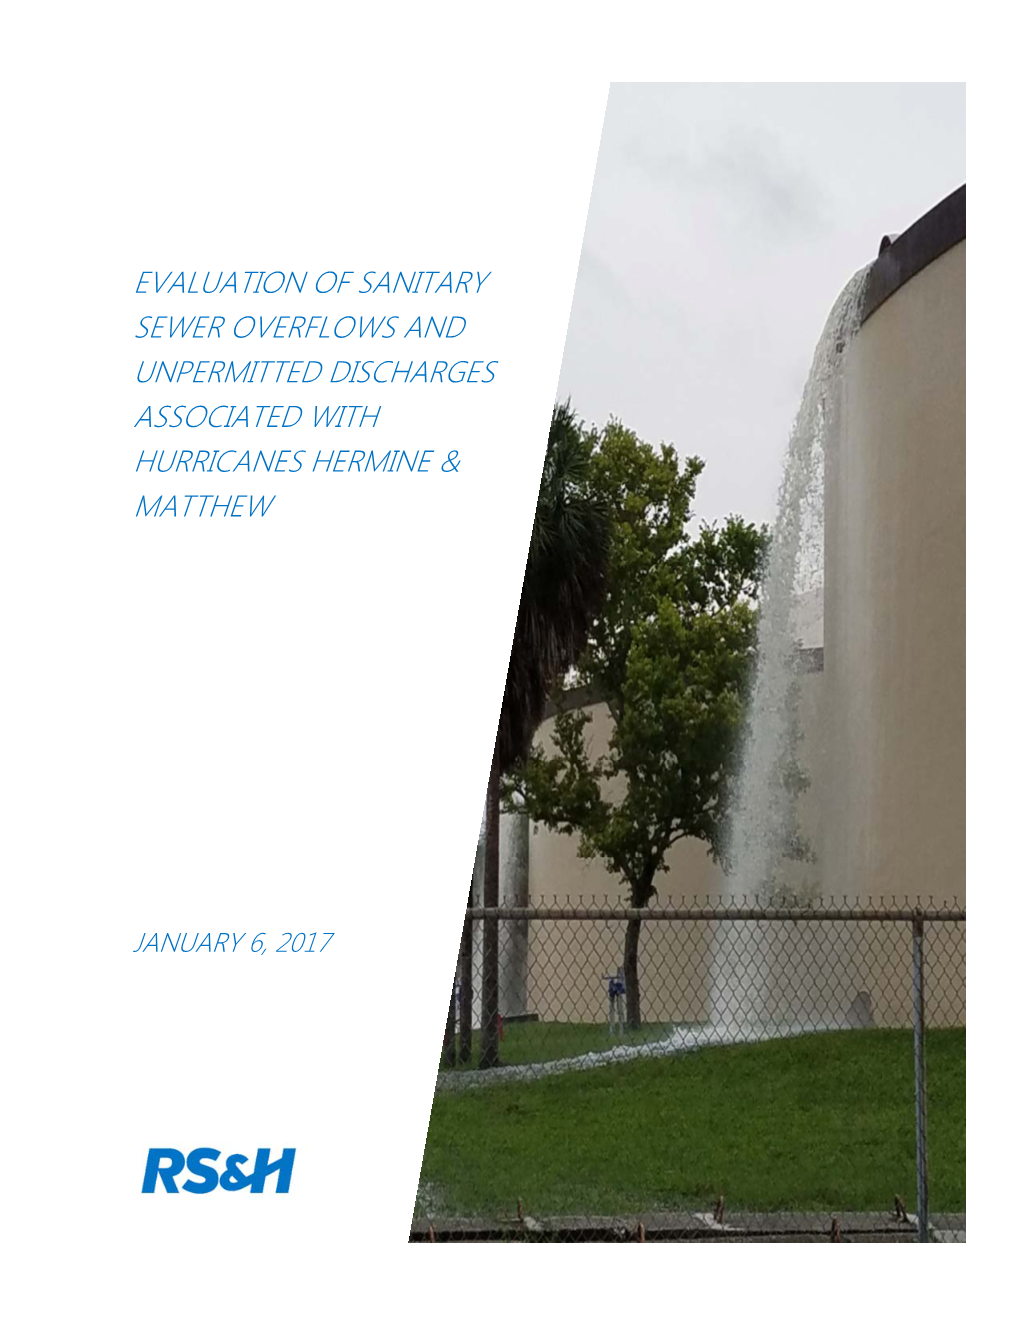 Evaluation of Sanitary Sewer Overflows and Unpermitted Discharges Associated with Hurricanes Hermine & Matthew